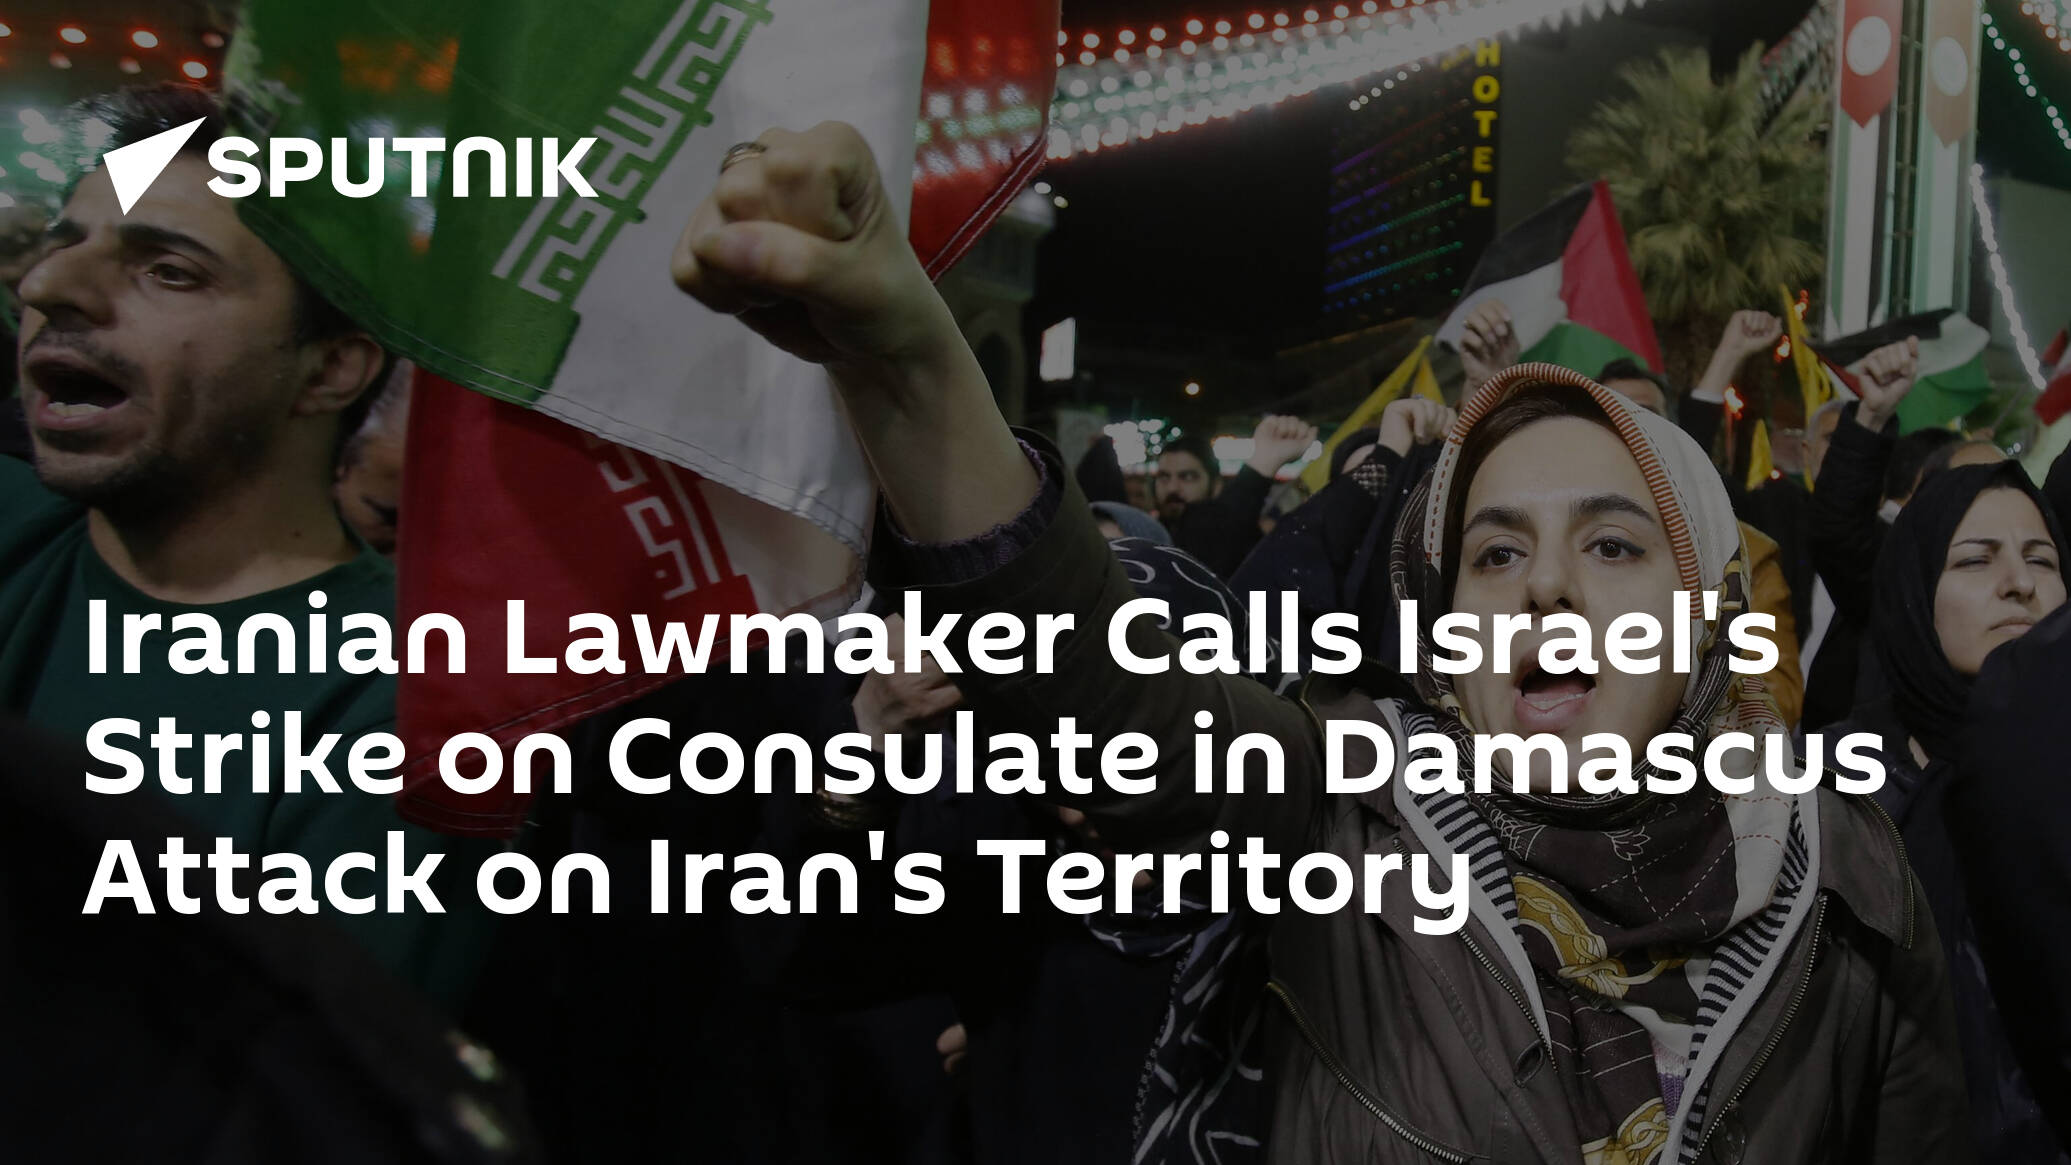 Iranian Lawmaker Calls Israel's Strike on Consulate in Damascus Attack on Iran's Territory